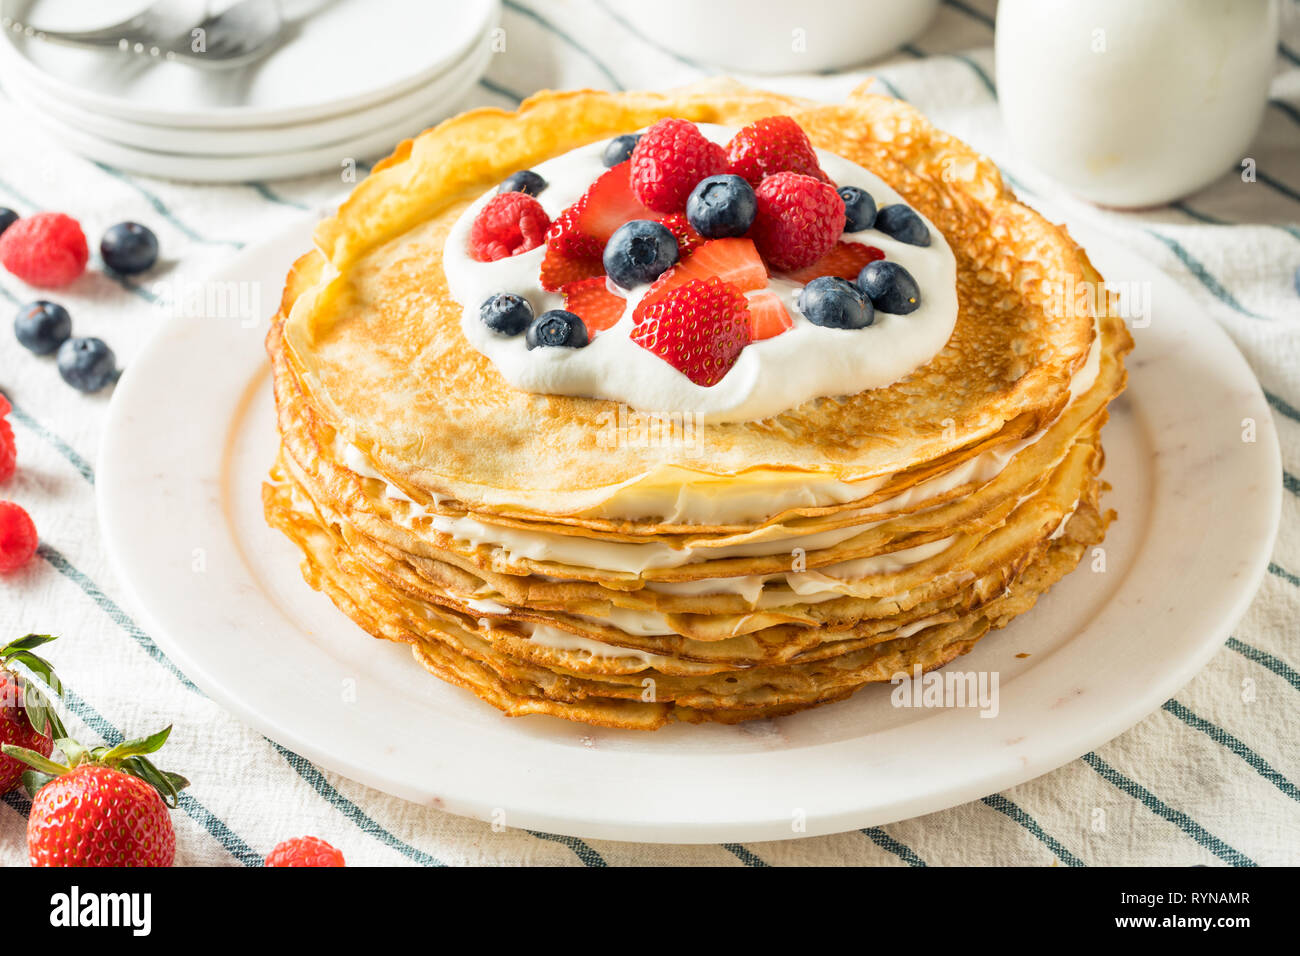 Sweet Homemade Layed Crepe Cake with Berries and Whippe Cream Stock Photo